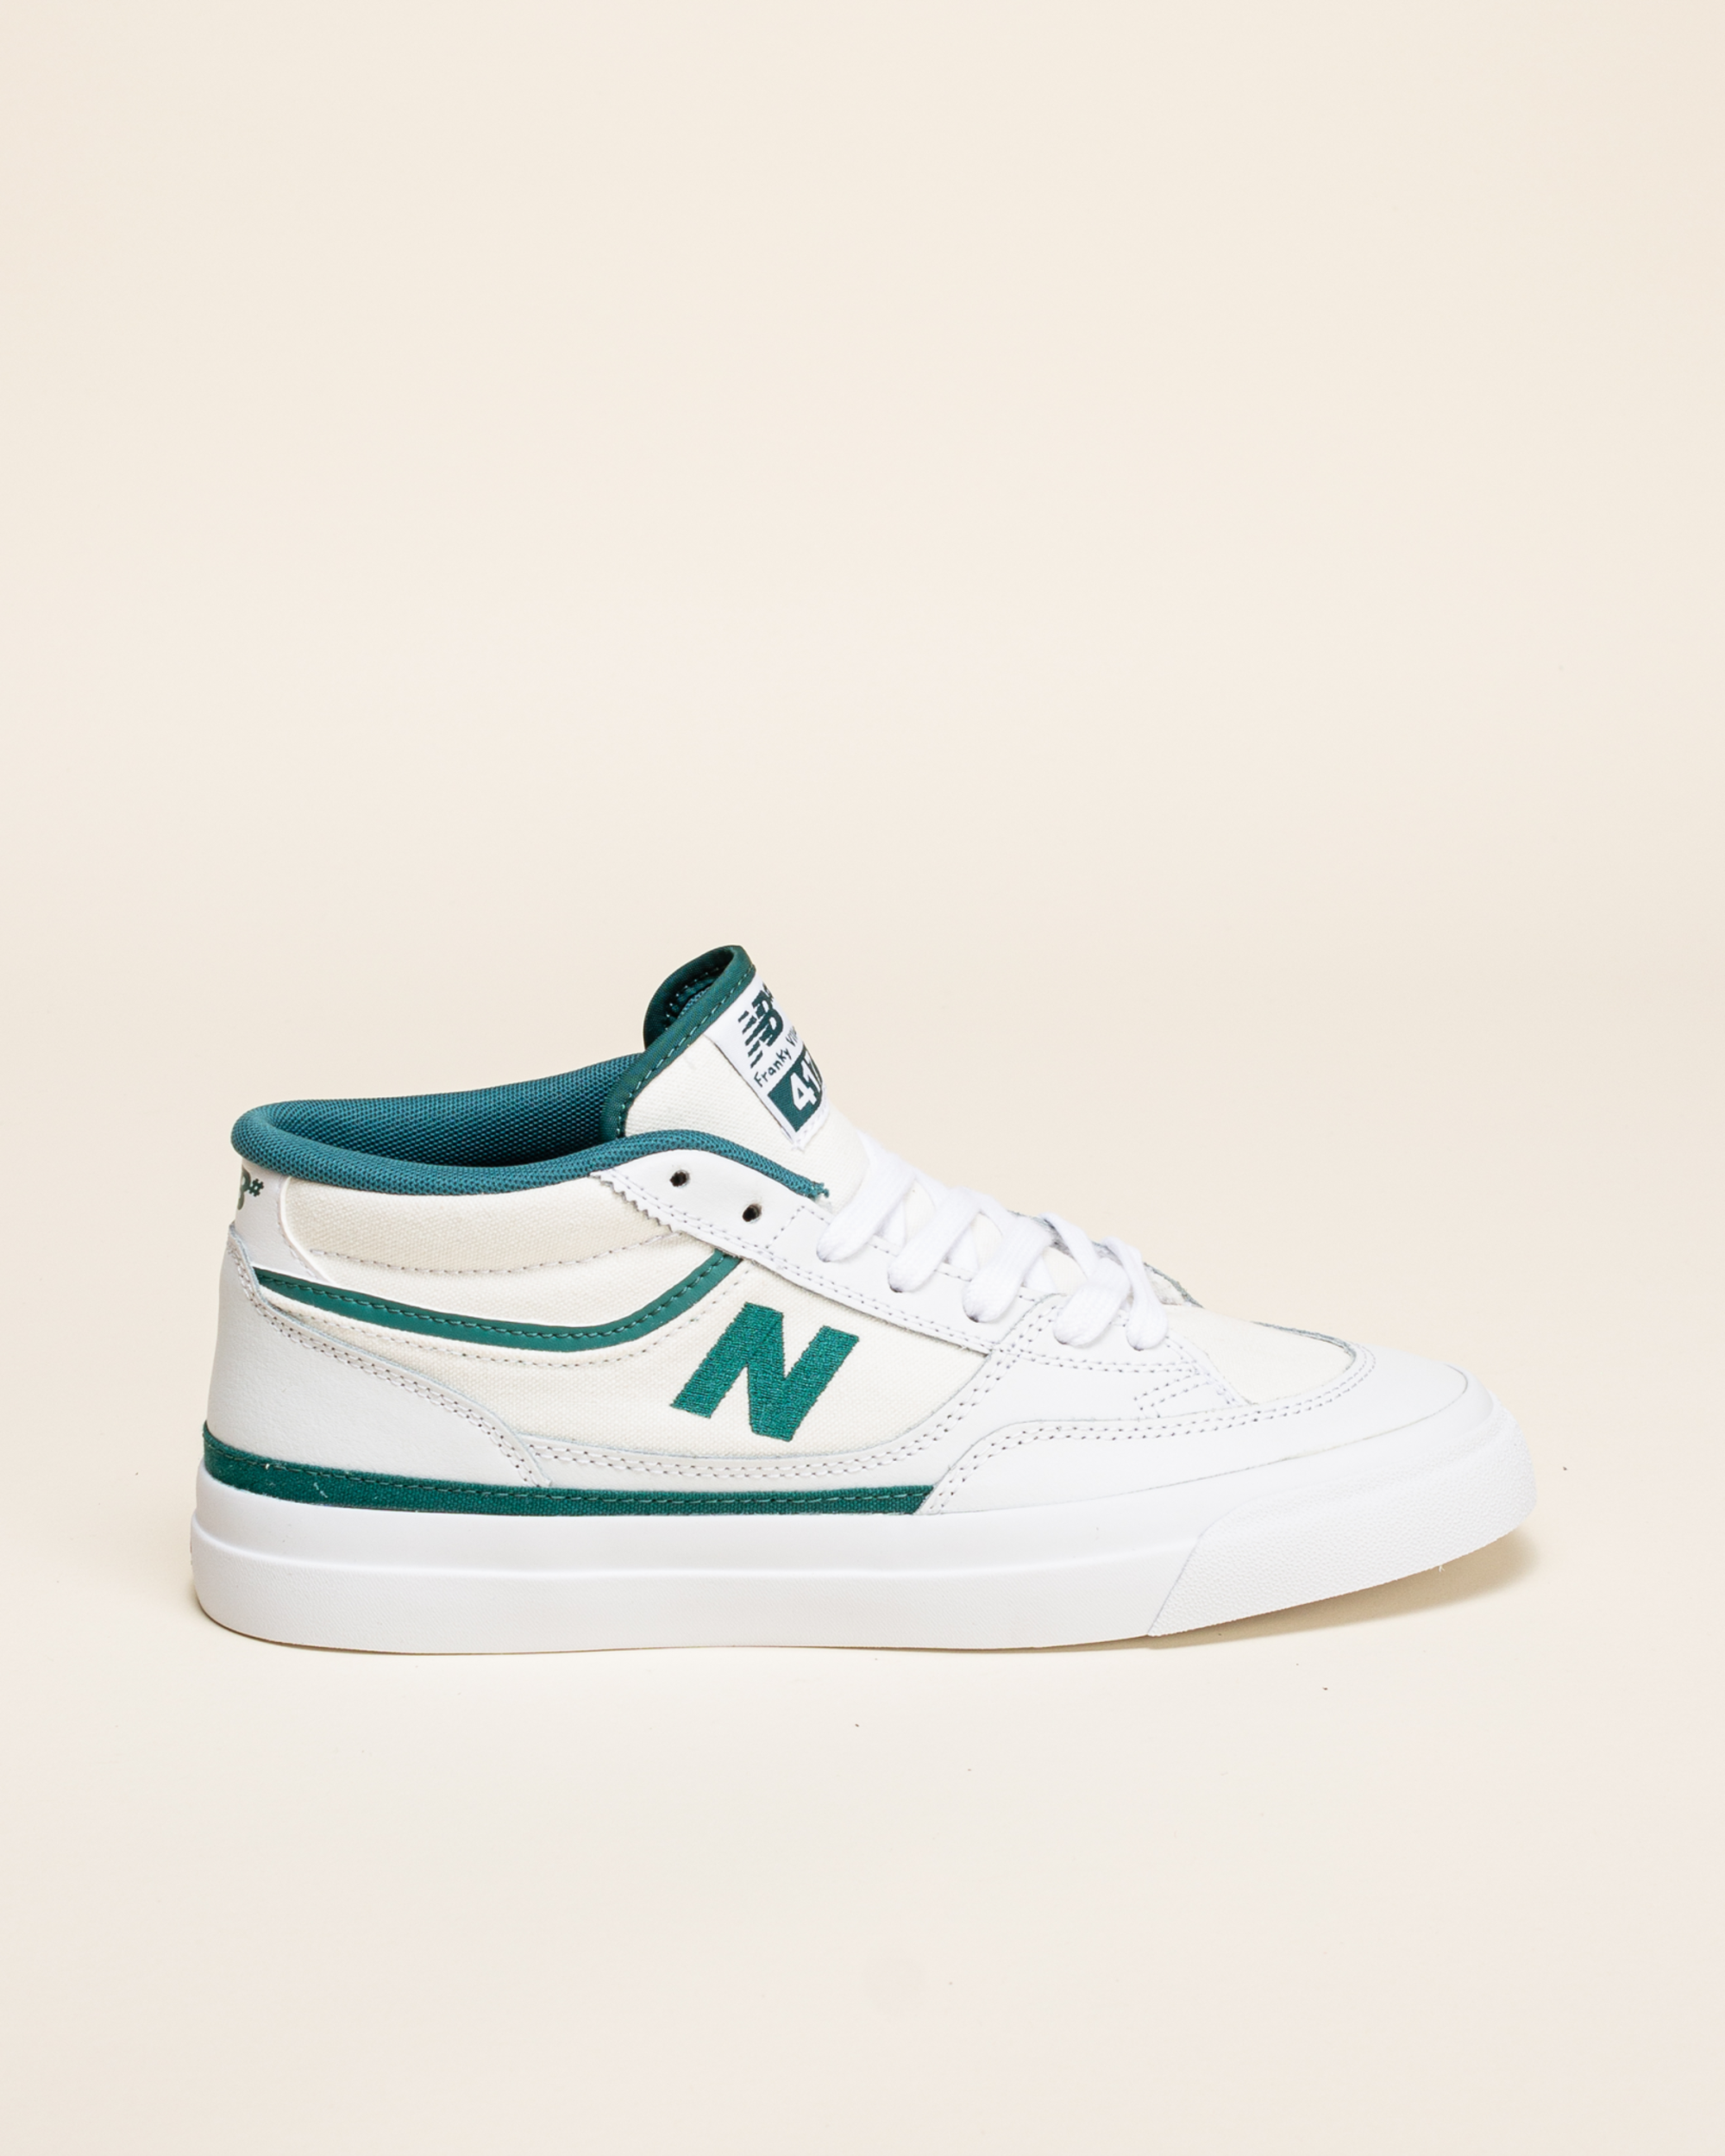 New Balance Numeric NM417RUP - White/Vintage Teal